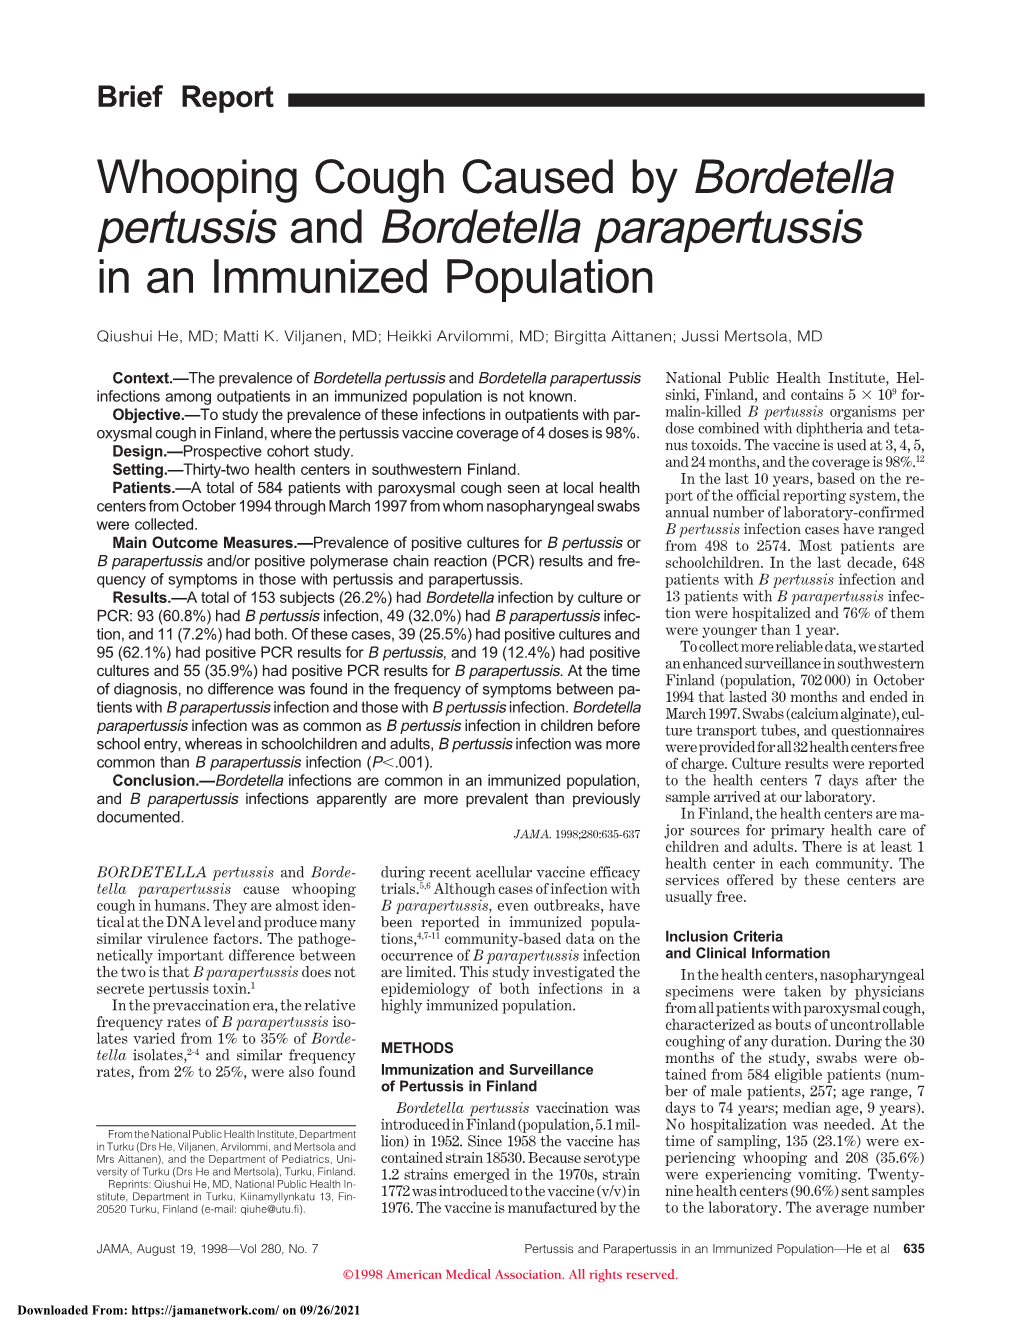 Pertussis and Bordetella Parapertussis in an Immunized Population